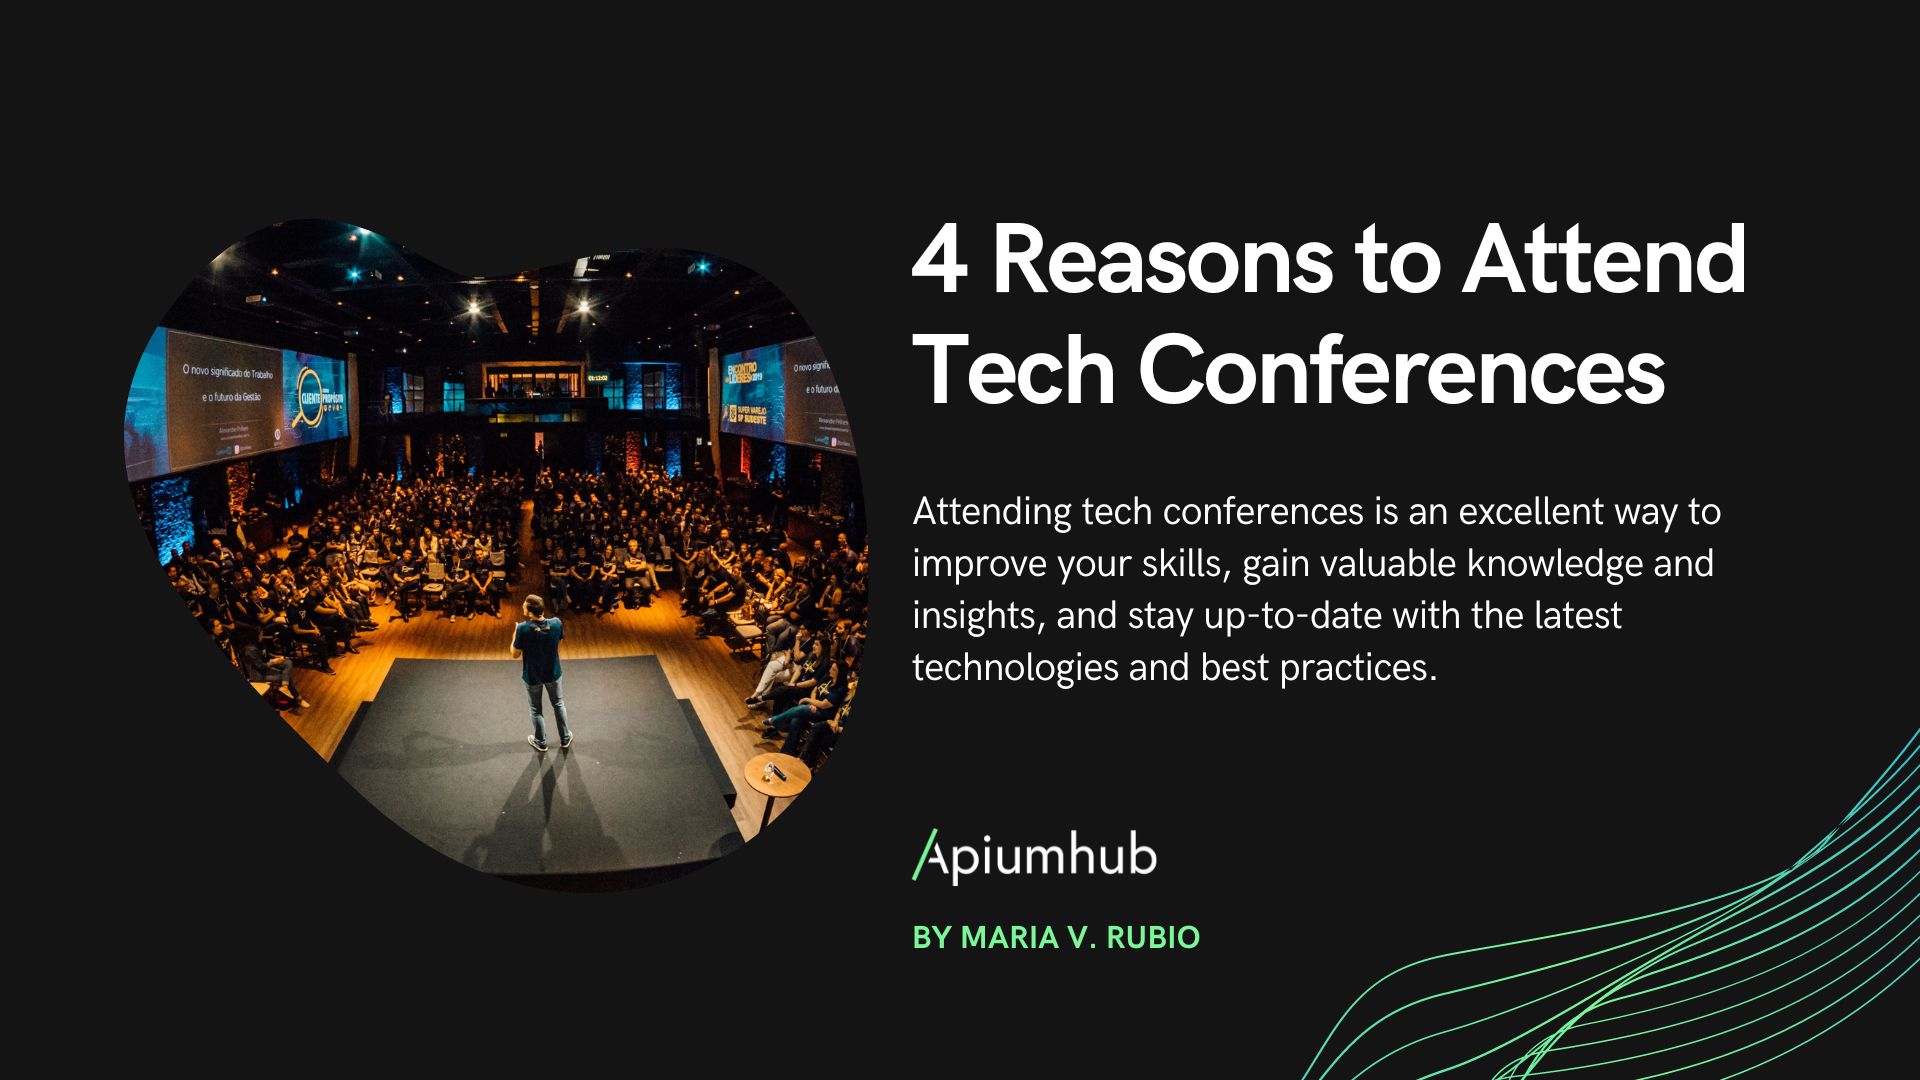 4 reasons to attend tech conferences